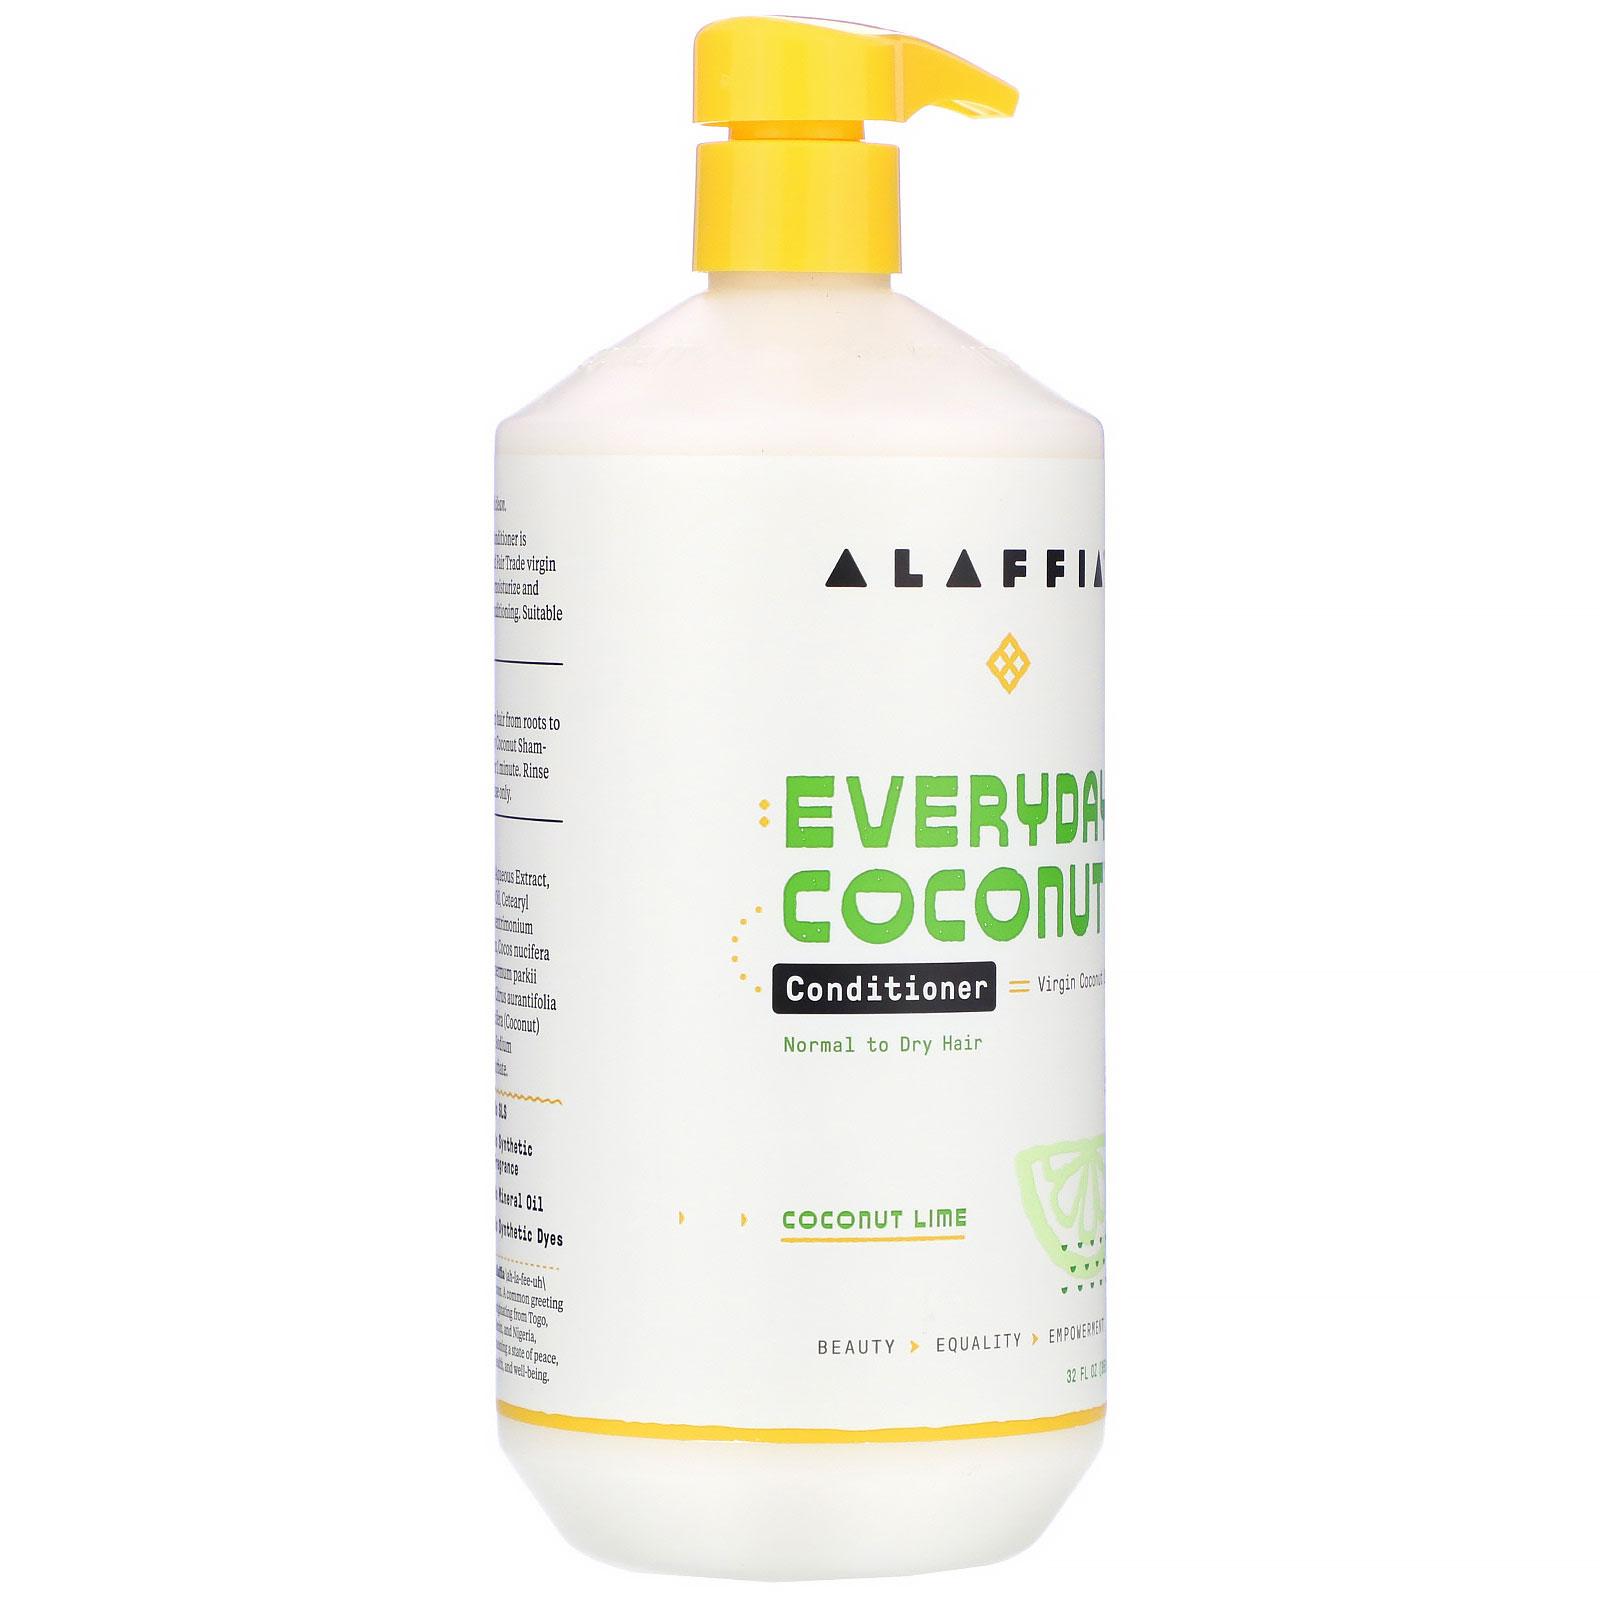 Alaffia, Everyday Coconut, Conditioner, Normal to Dry Hair, Coconut Lime, 32 fl oz (pack of 3) - image 5 of 5